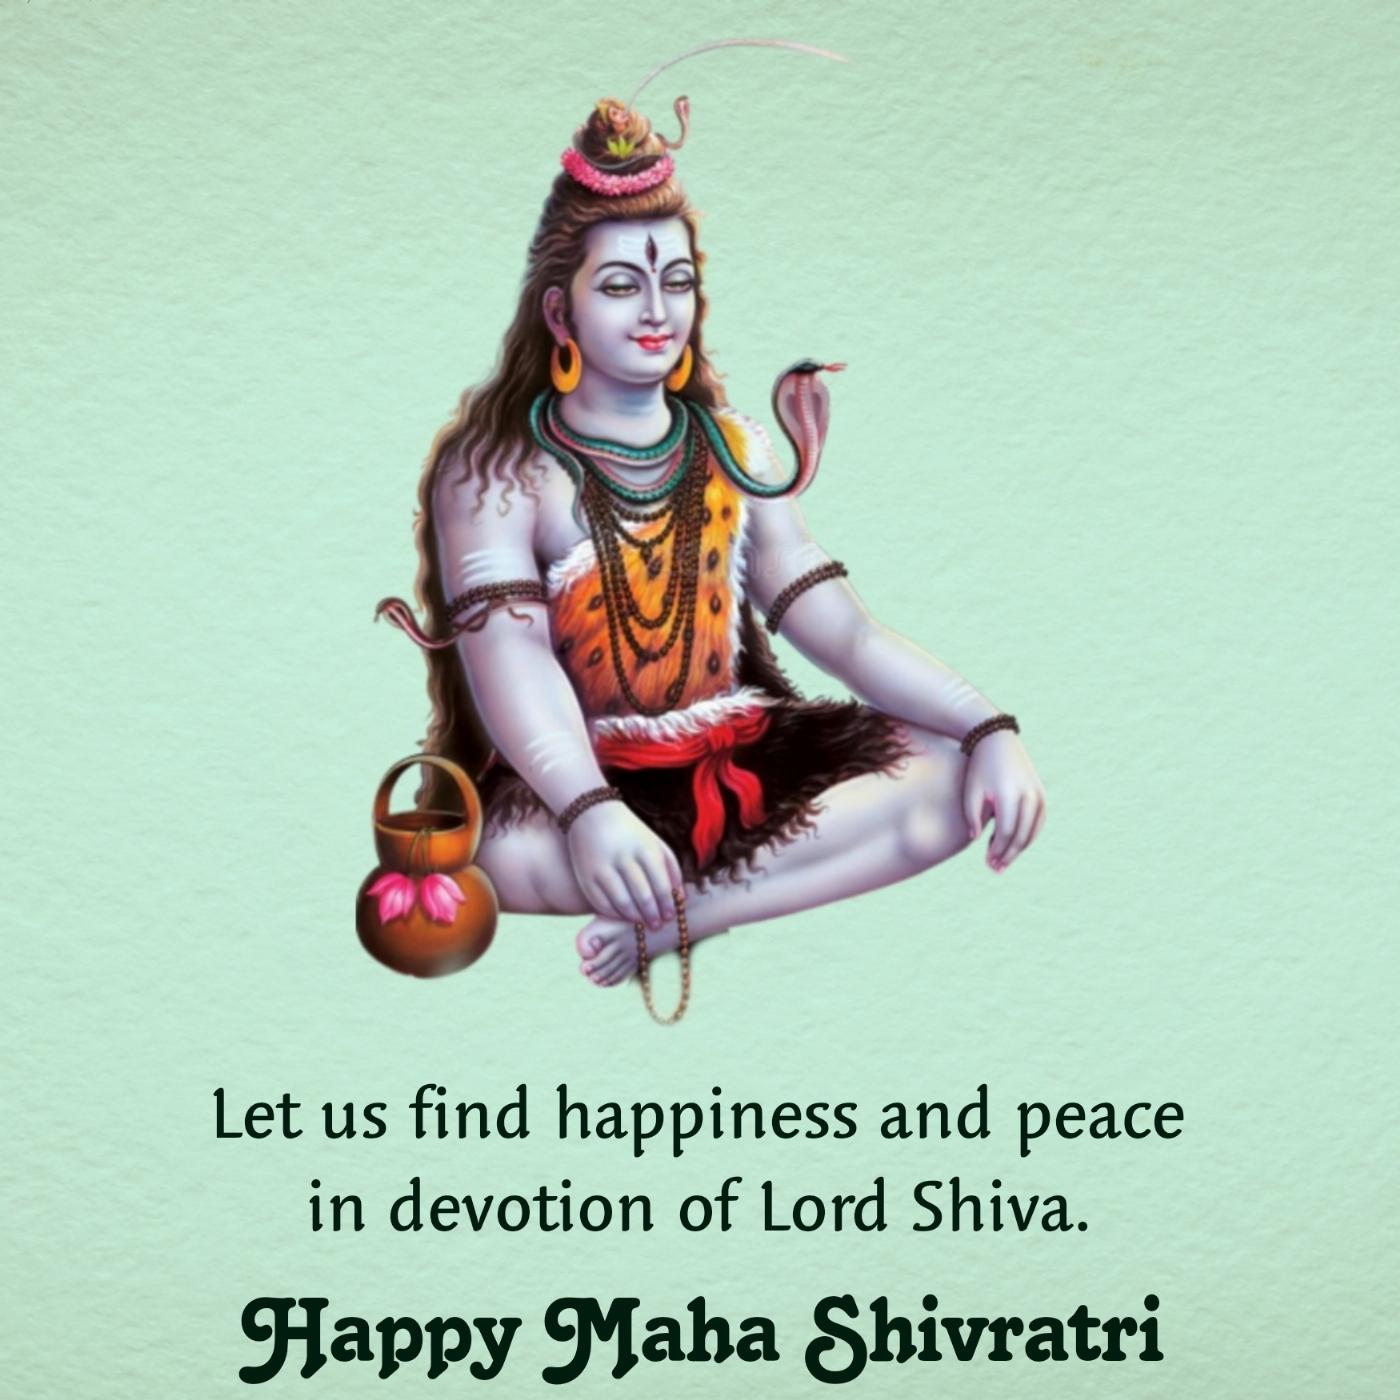 Let us find happiness and peace in devotion of Lord Shiva